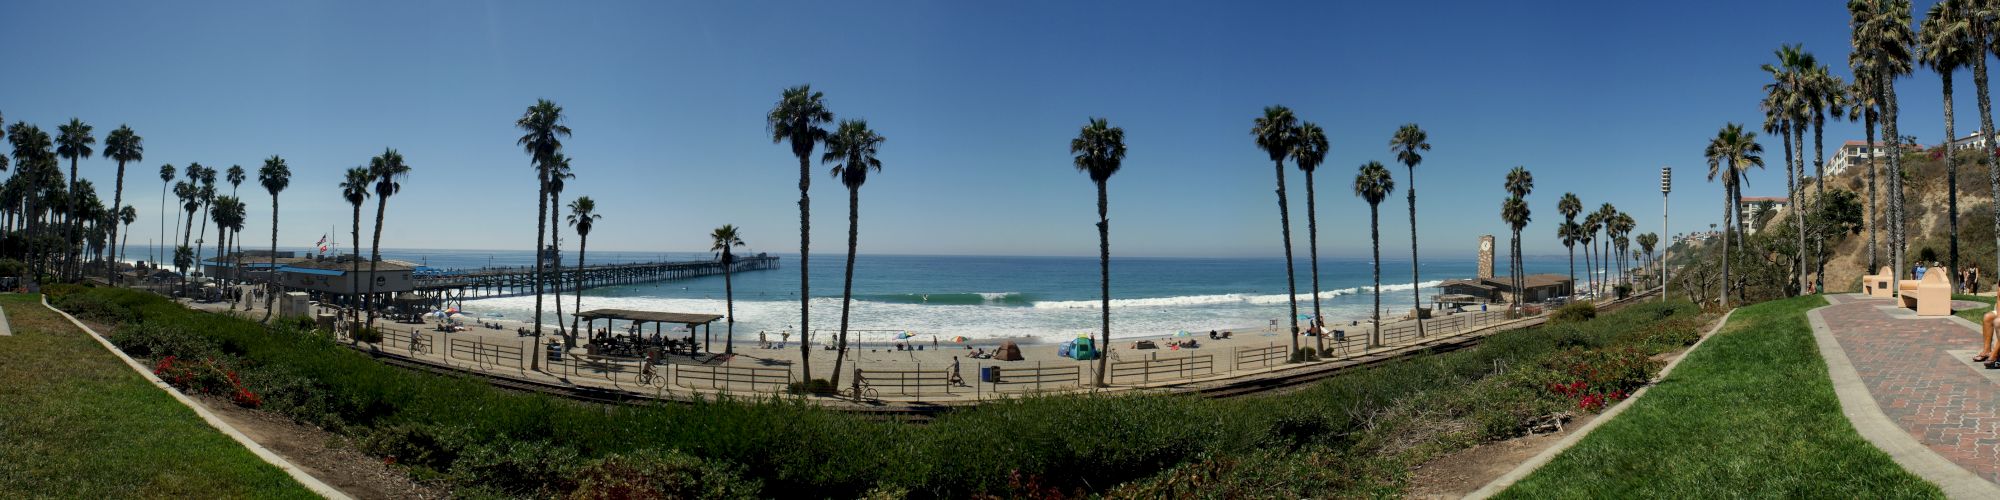 A beachfront scene with palm trees, a pier extending into the ocean, and people enjoying the sandy beach and waves under a clear blue sky.